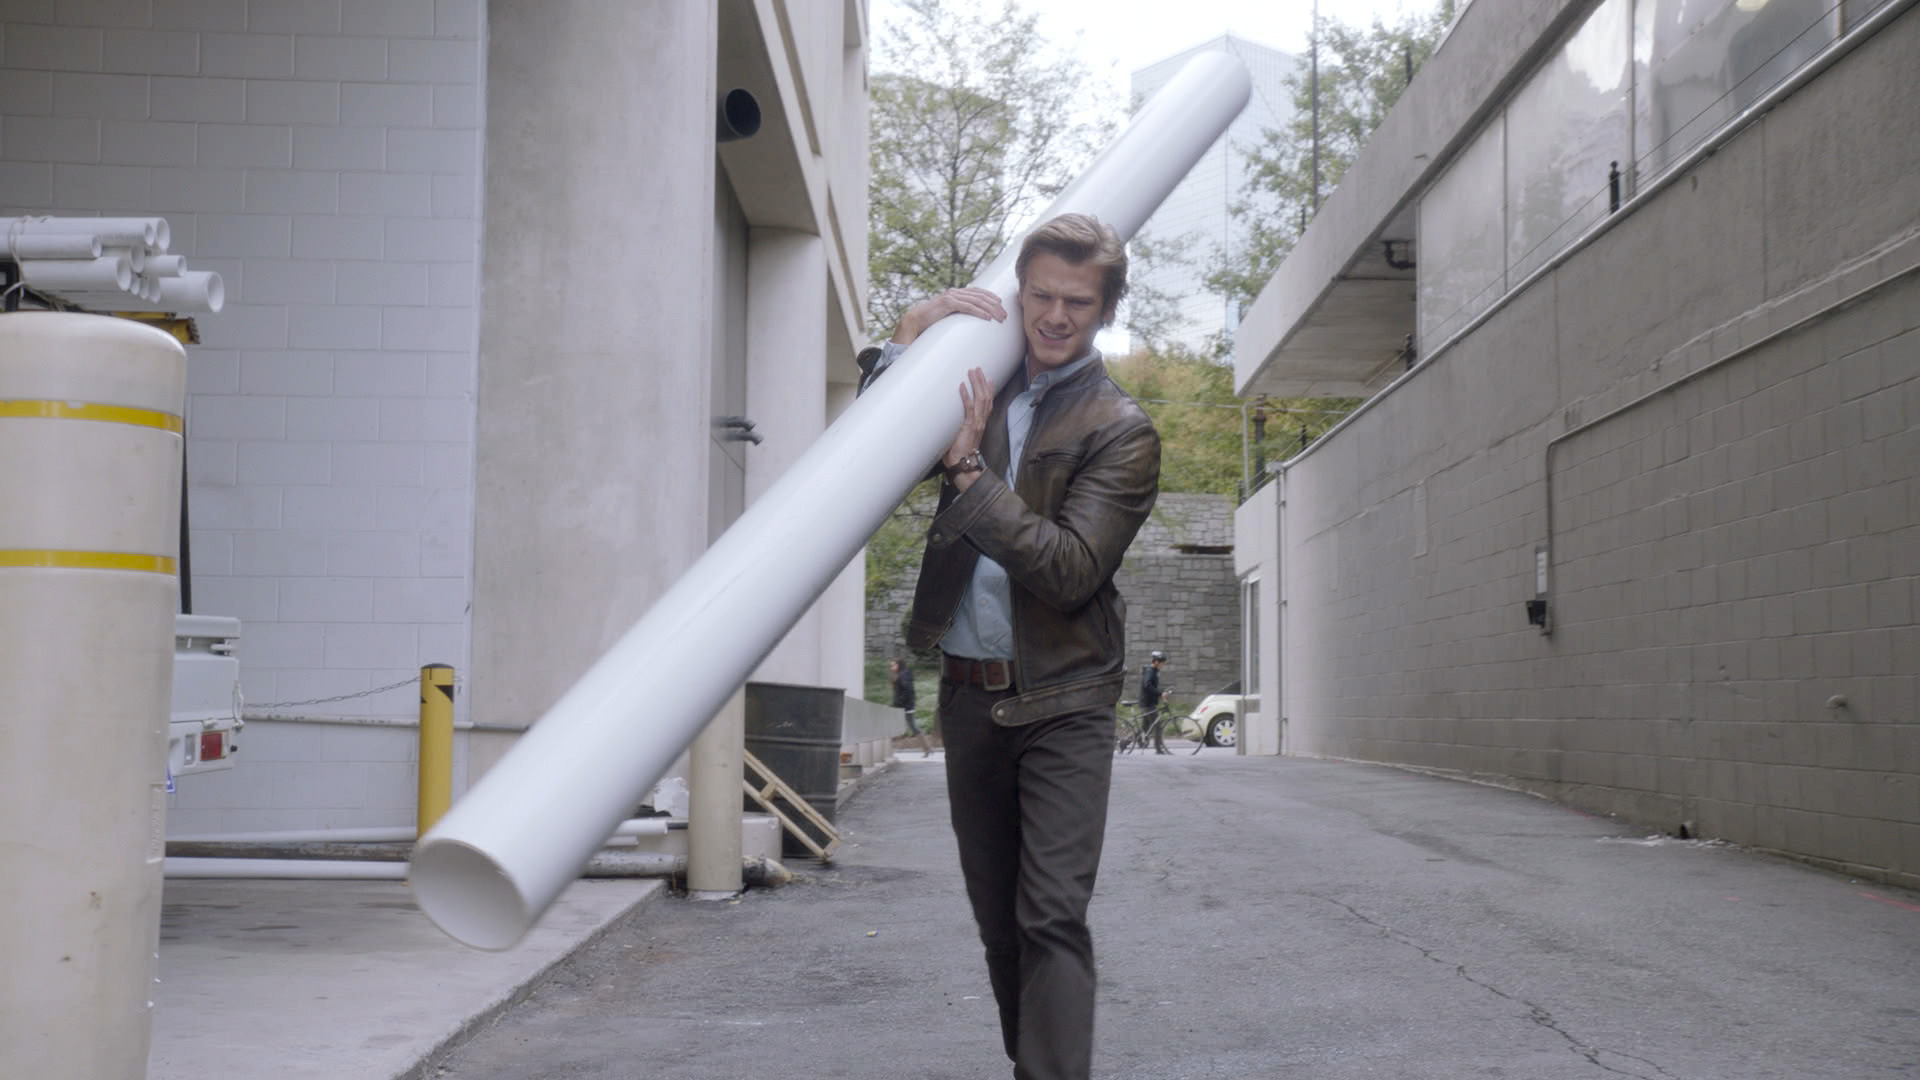 MacGyver makes use of a discarded PVC pipe.